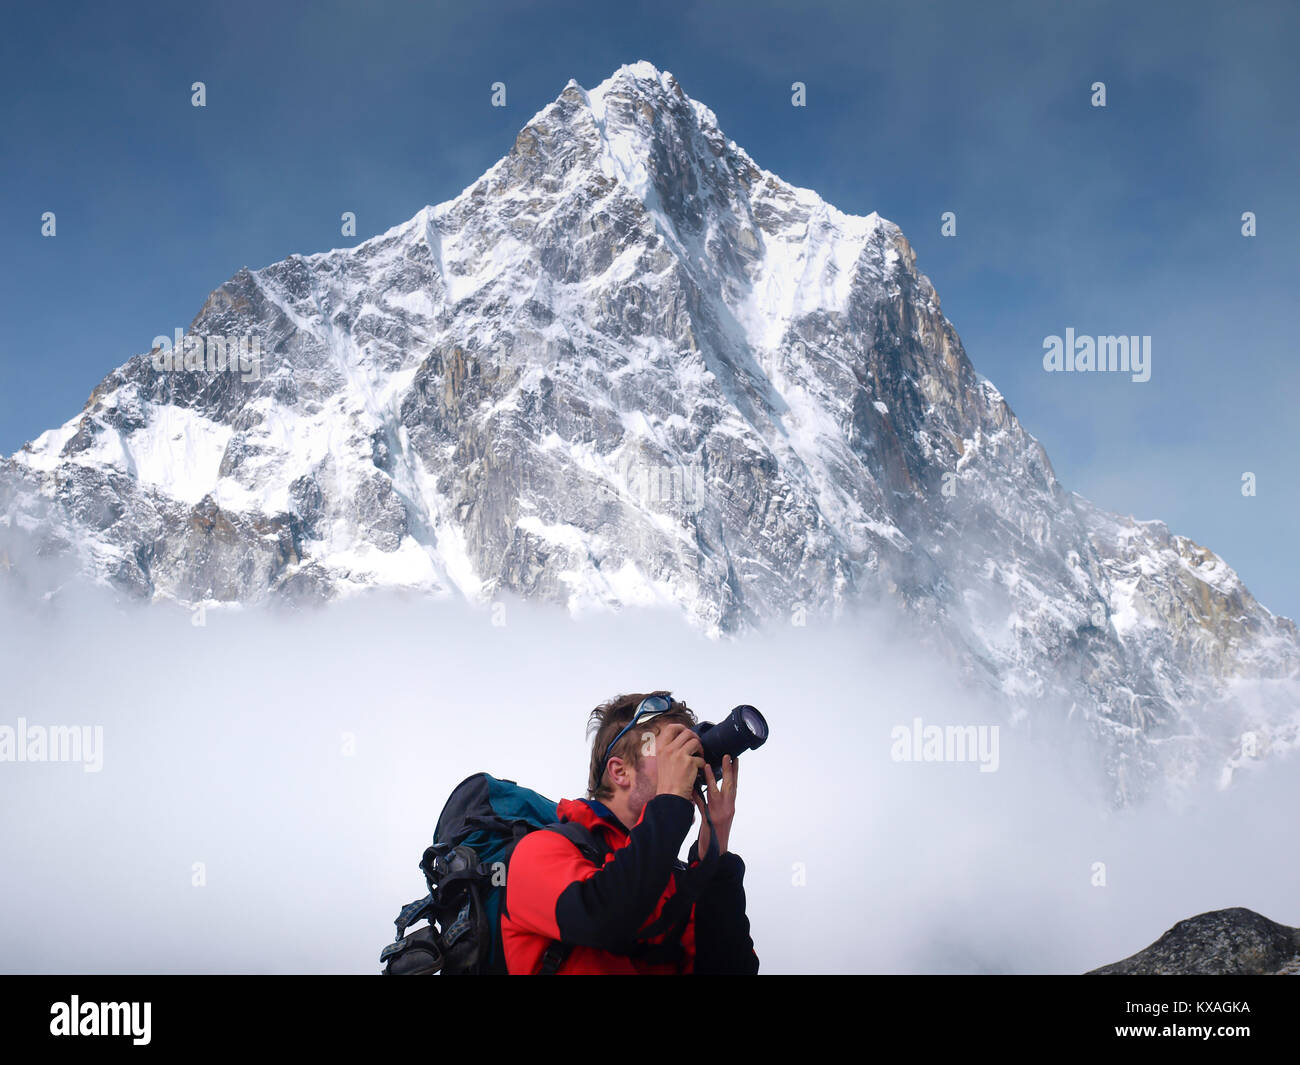 Trekker is taking picture while mount Cholatse is rising above clouds, Khumbu, Nepal Stock Photo